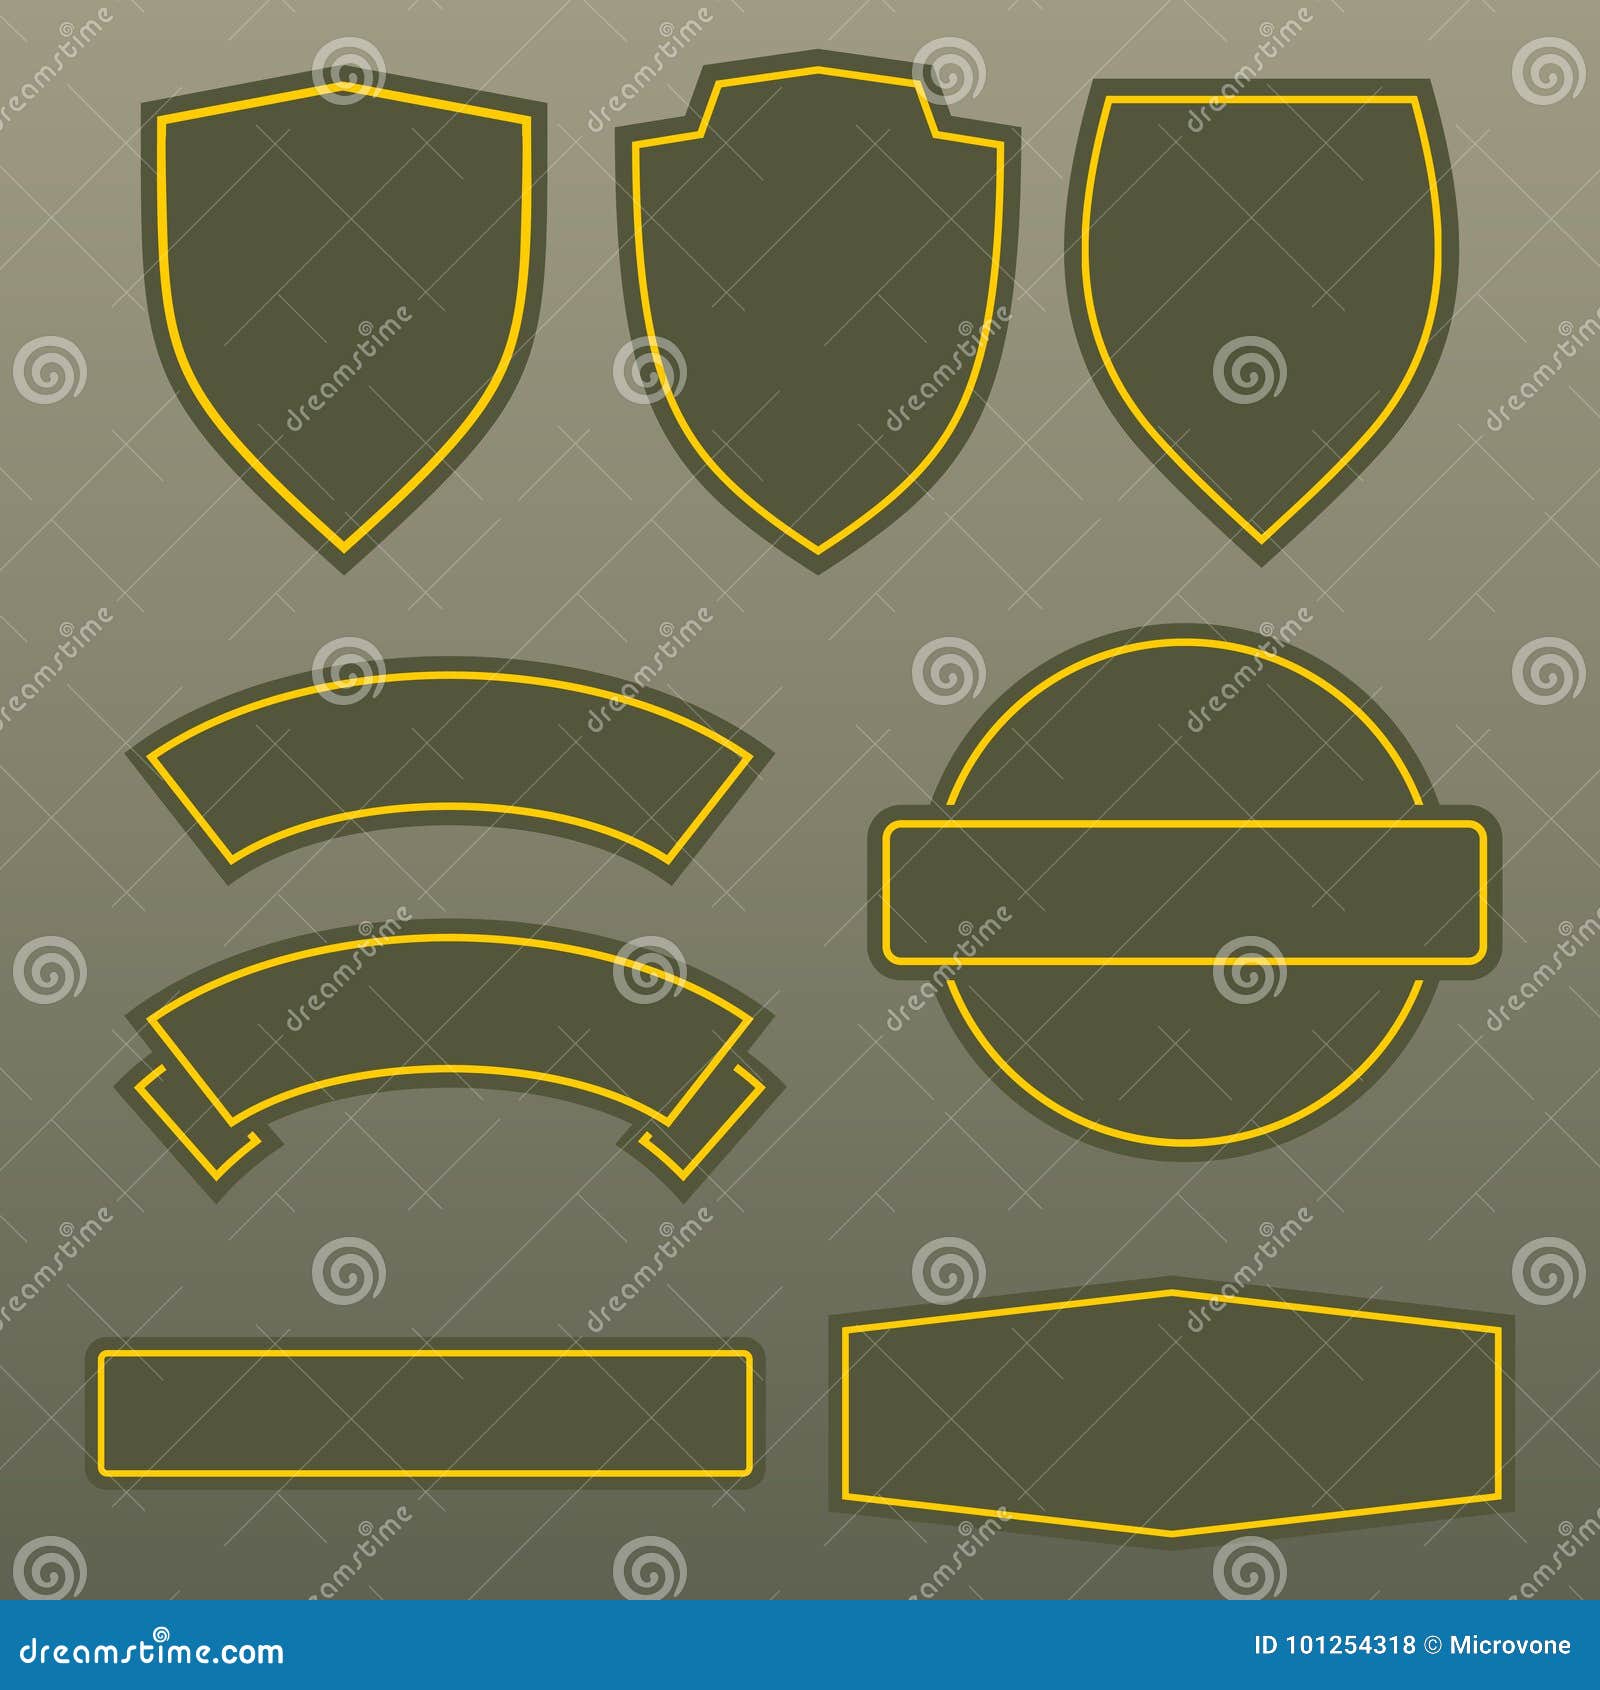 military colors army patches template 